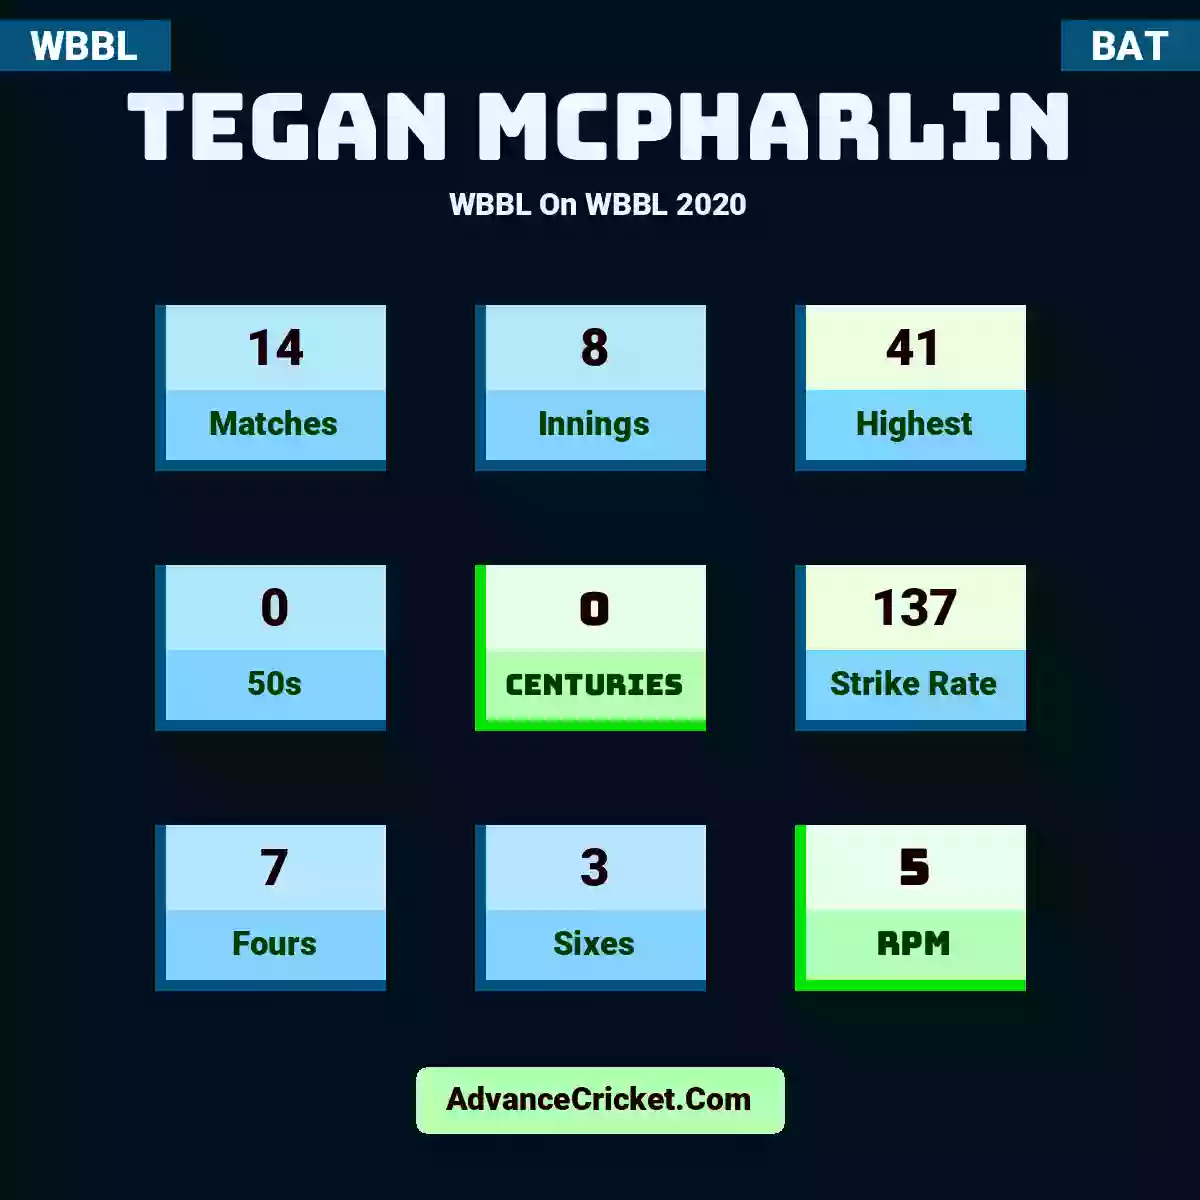 Tegan McPharlin WBBL  On WBBL 2020, Tegan McPharlin played 14 matches, scored 41 runs as highest, 0 half-centuries, and 0 centuries, with a strike rate of 137. T.McPharlin hit 7 fours and 3 sixes, with an RPM of 5.